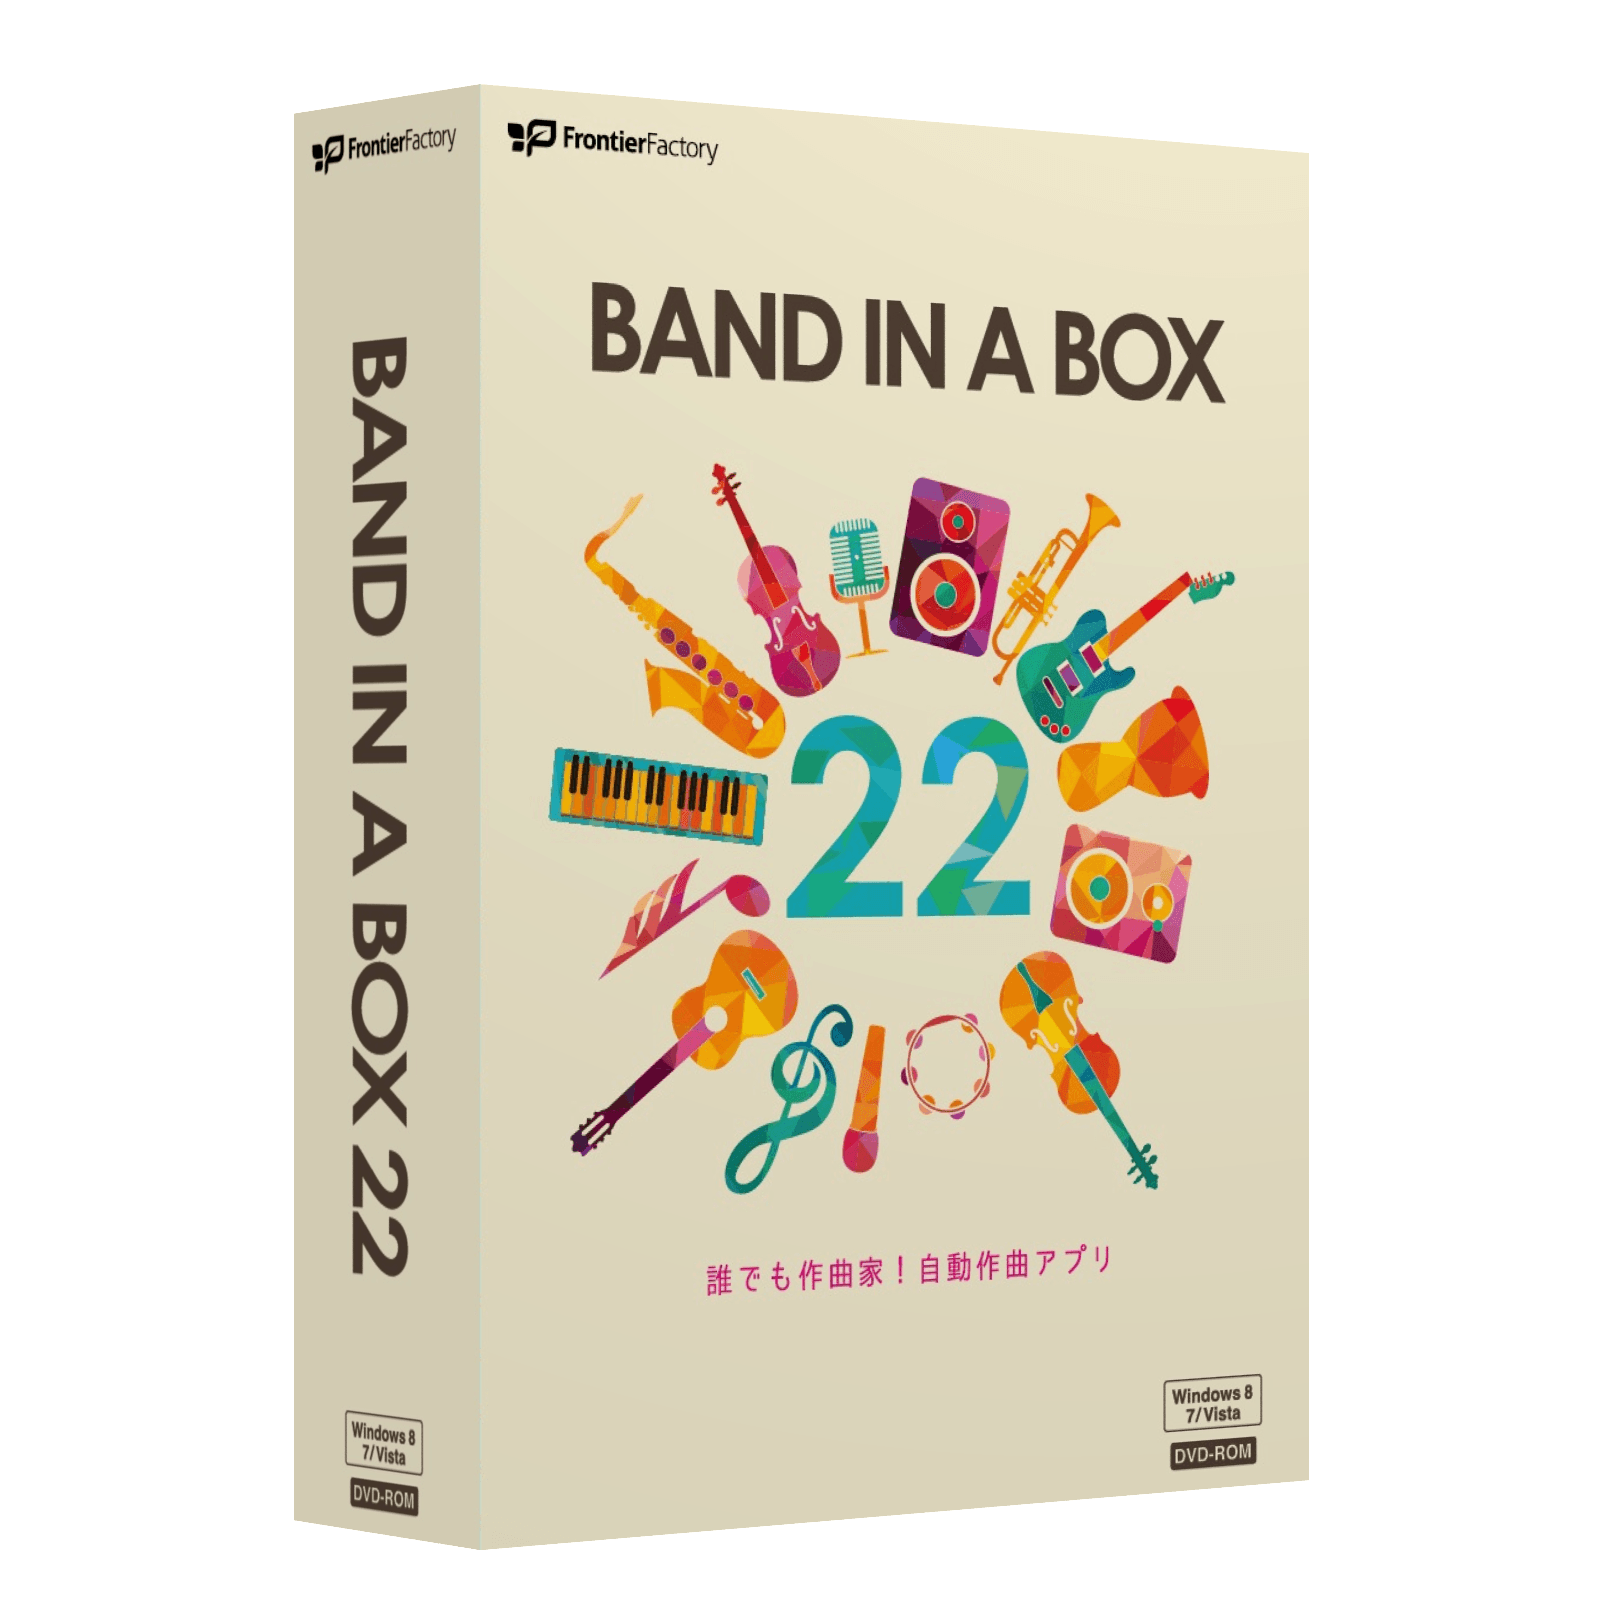 『Band-in-a-Box 22 for Windows』発売のお知らせ